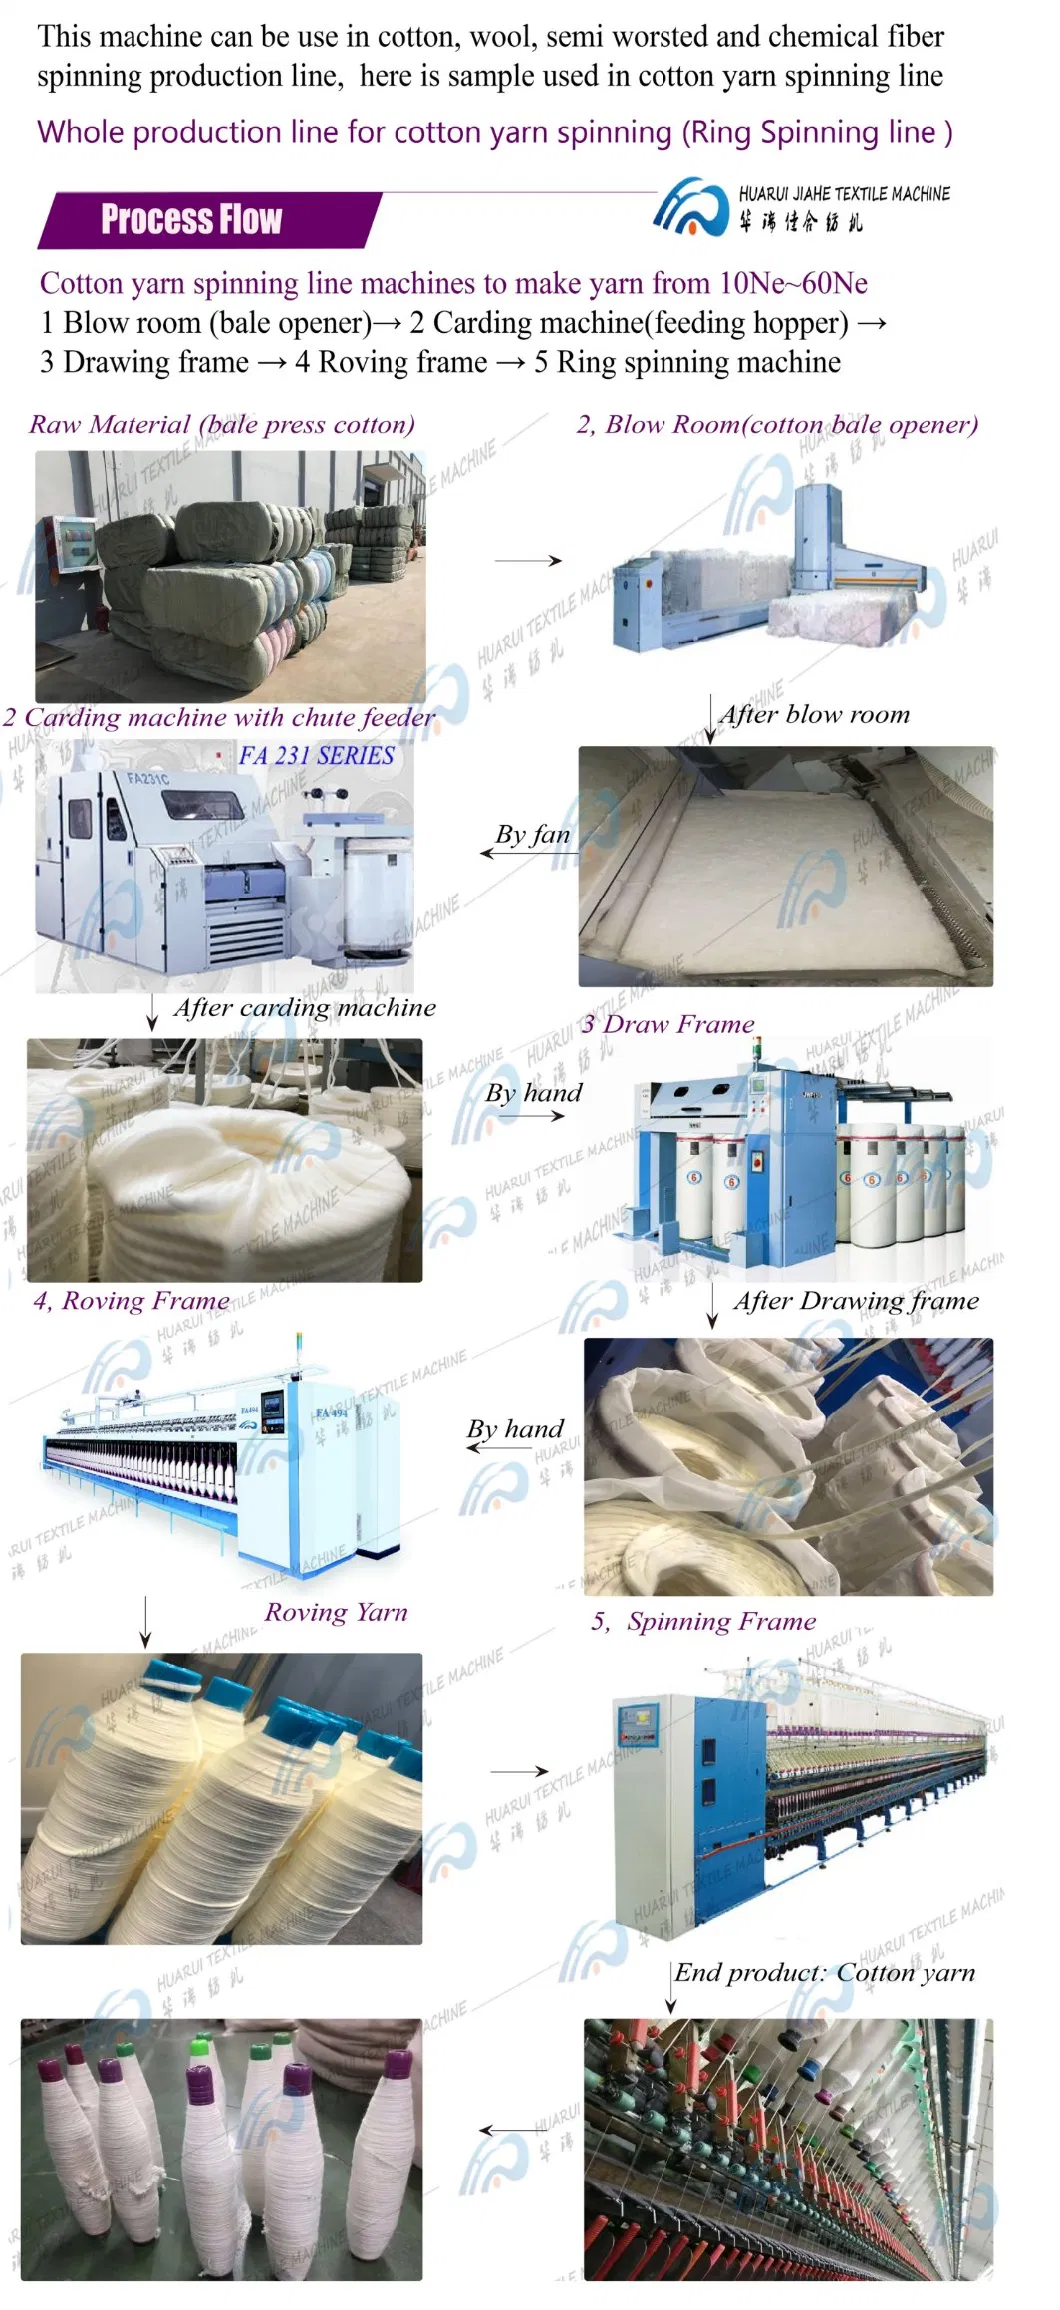 Factory Directly Supplies Yarn Dyeing Sizing Machine Ring Spinning, Customizable Cotton Yarn Manufacturer New Energy Dyeing Machine